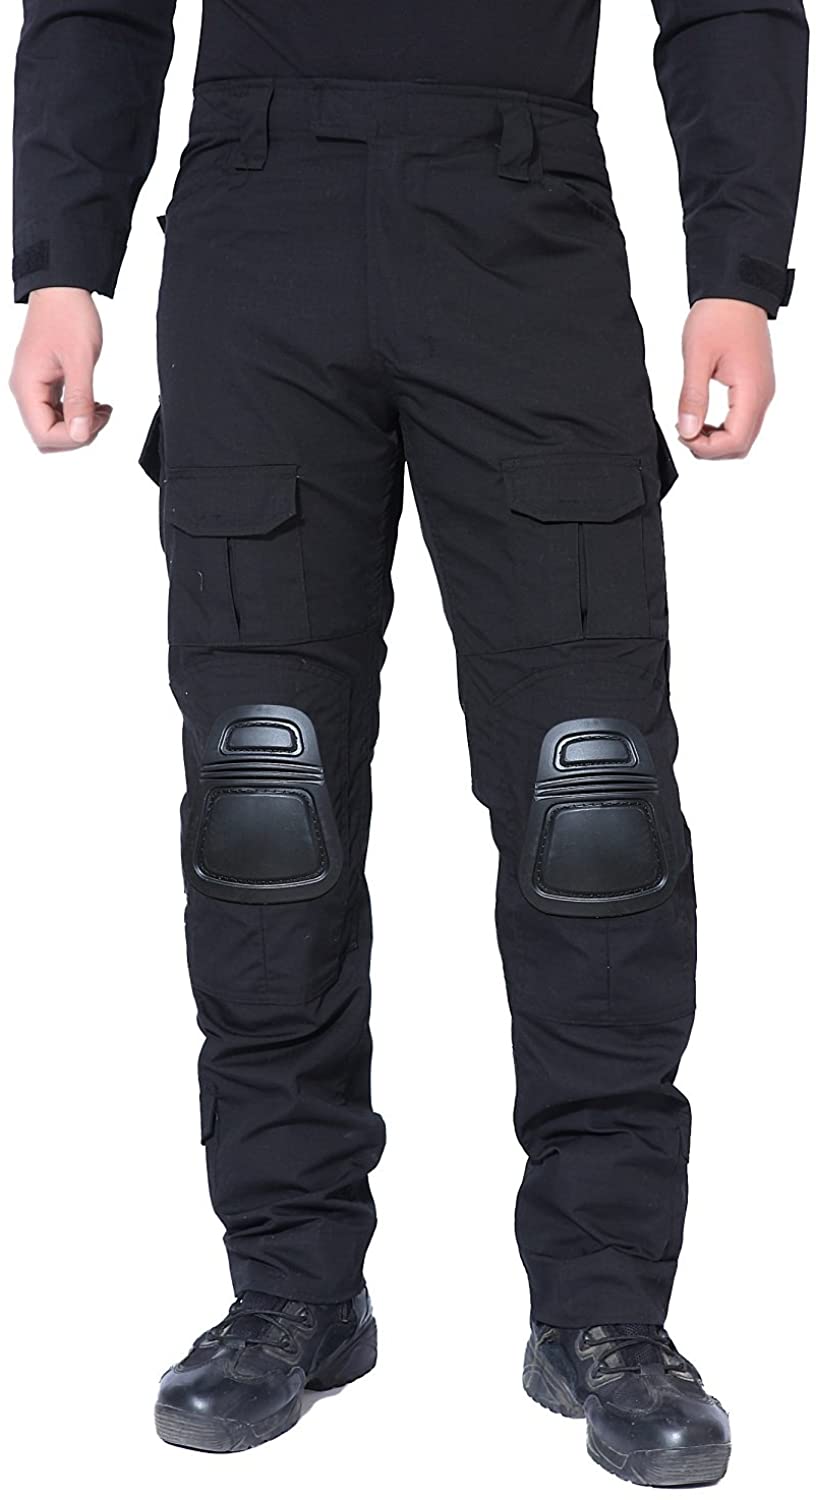 MAGCOMSEN Men's Military Pants Ripstop Tactical Pants Slim Fit with ...